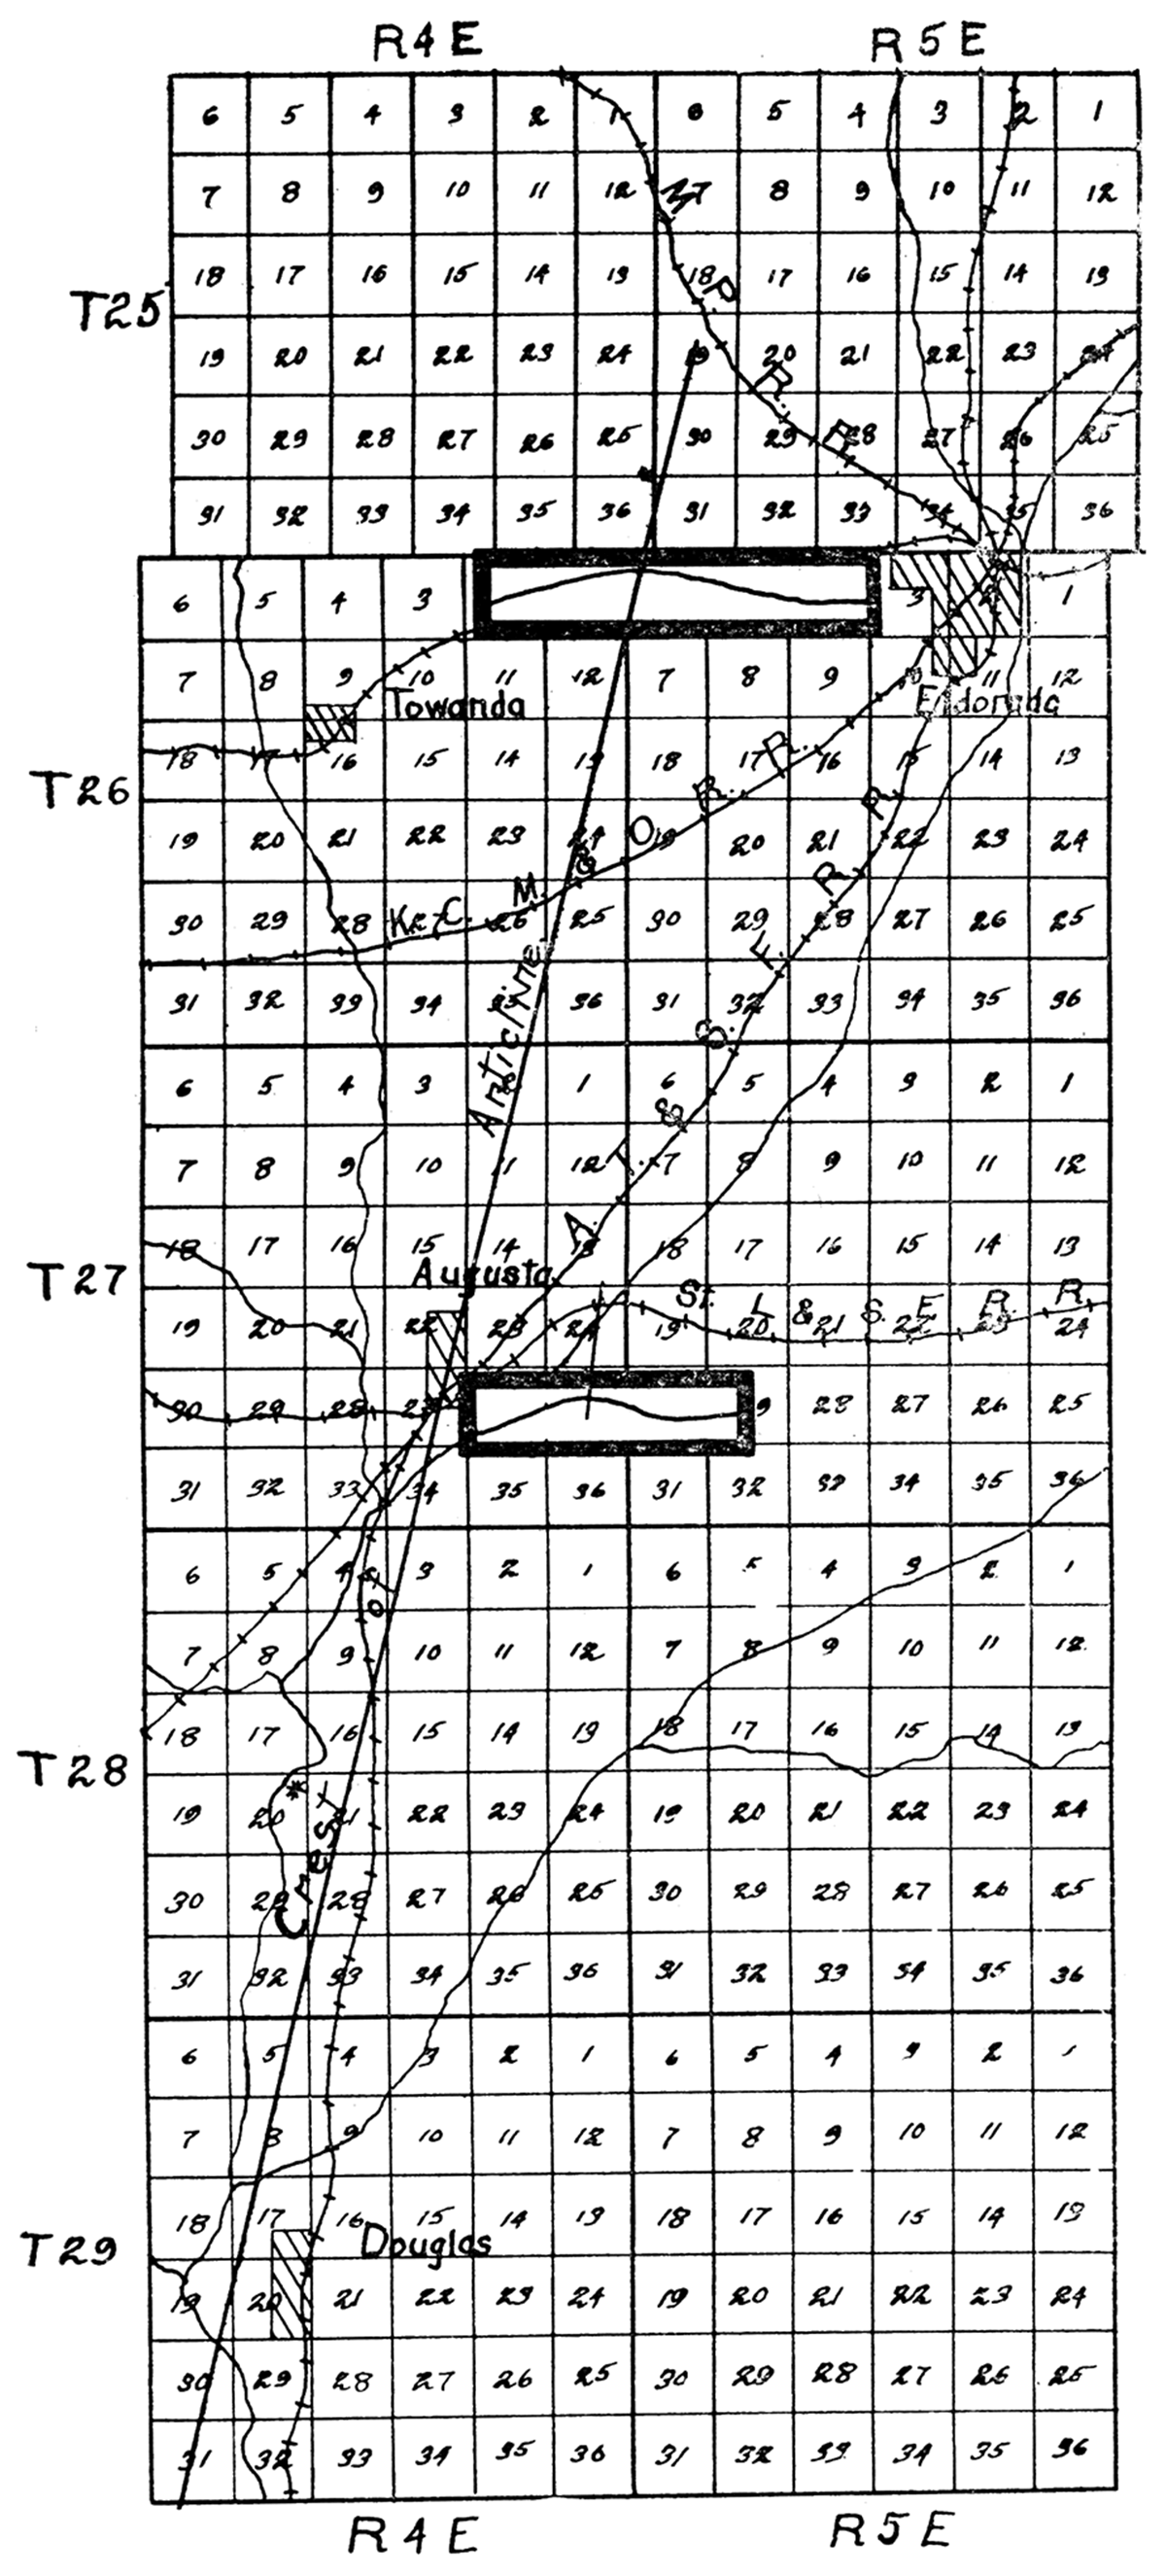 Field map of a portion of Butler county made in 1914 by Haworth and Haworth.